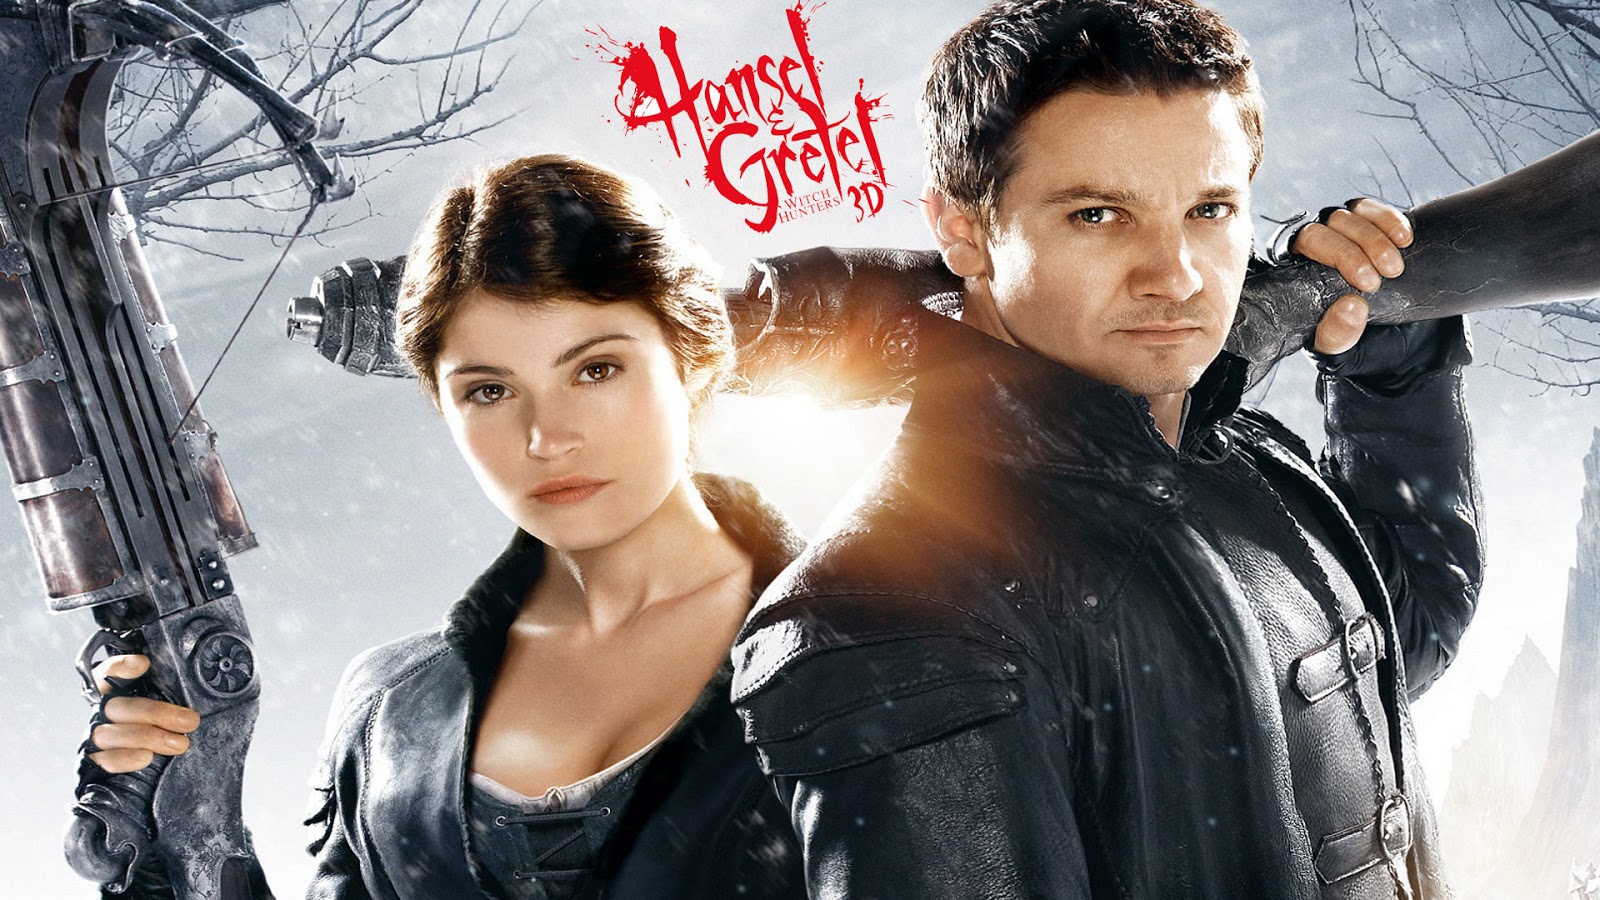 hansel and gretel witch hunters 2 full movie free download in 11